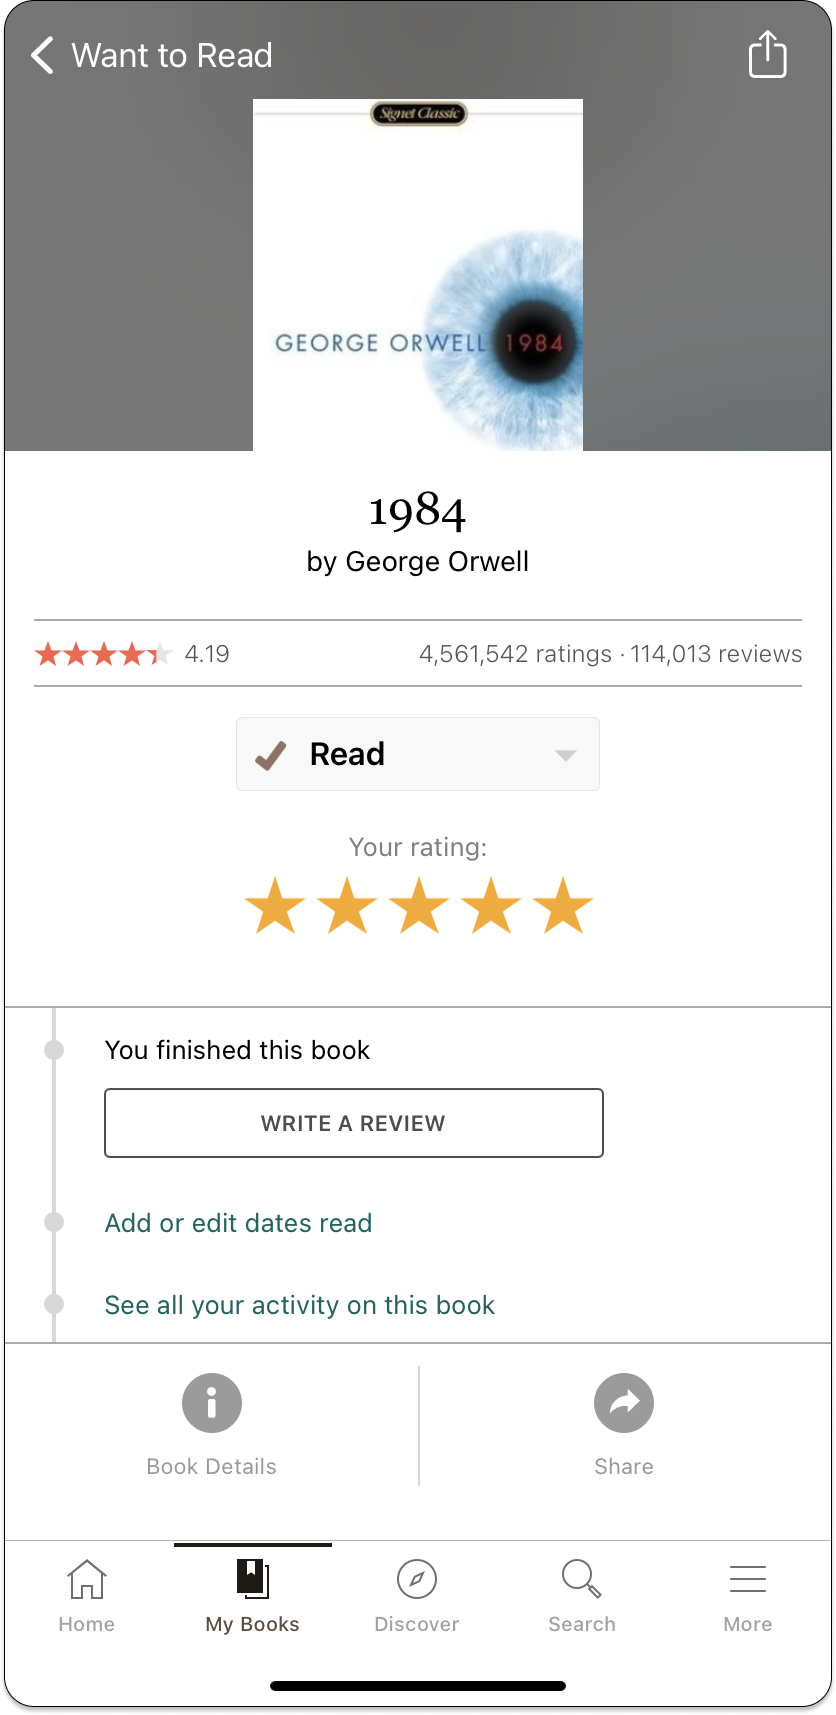 Marking a book as read in Goodreads